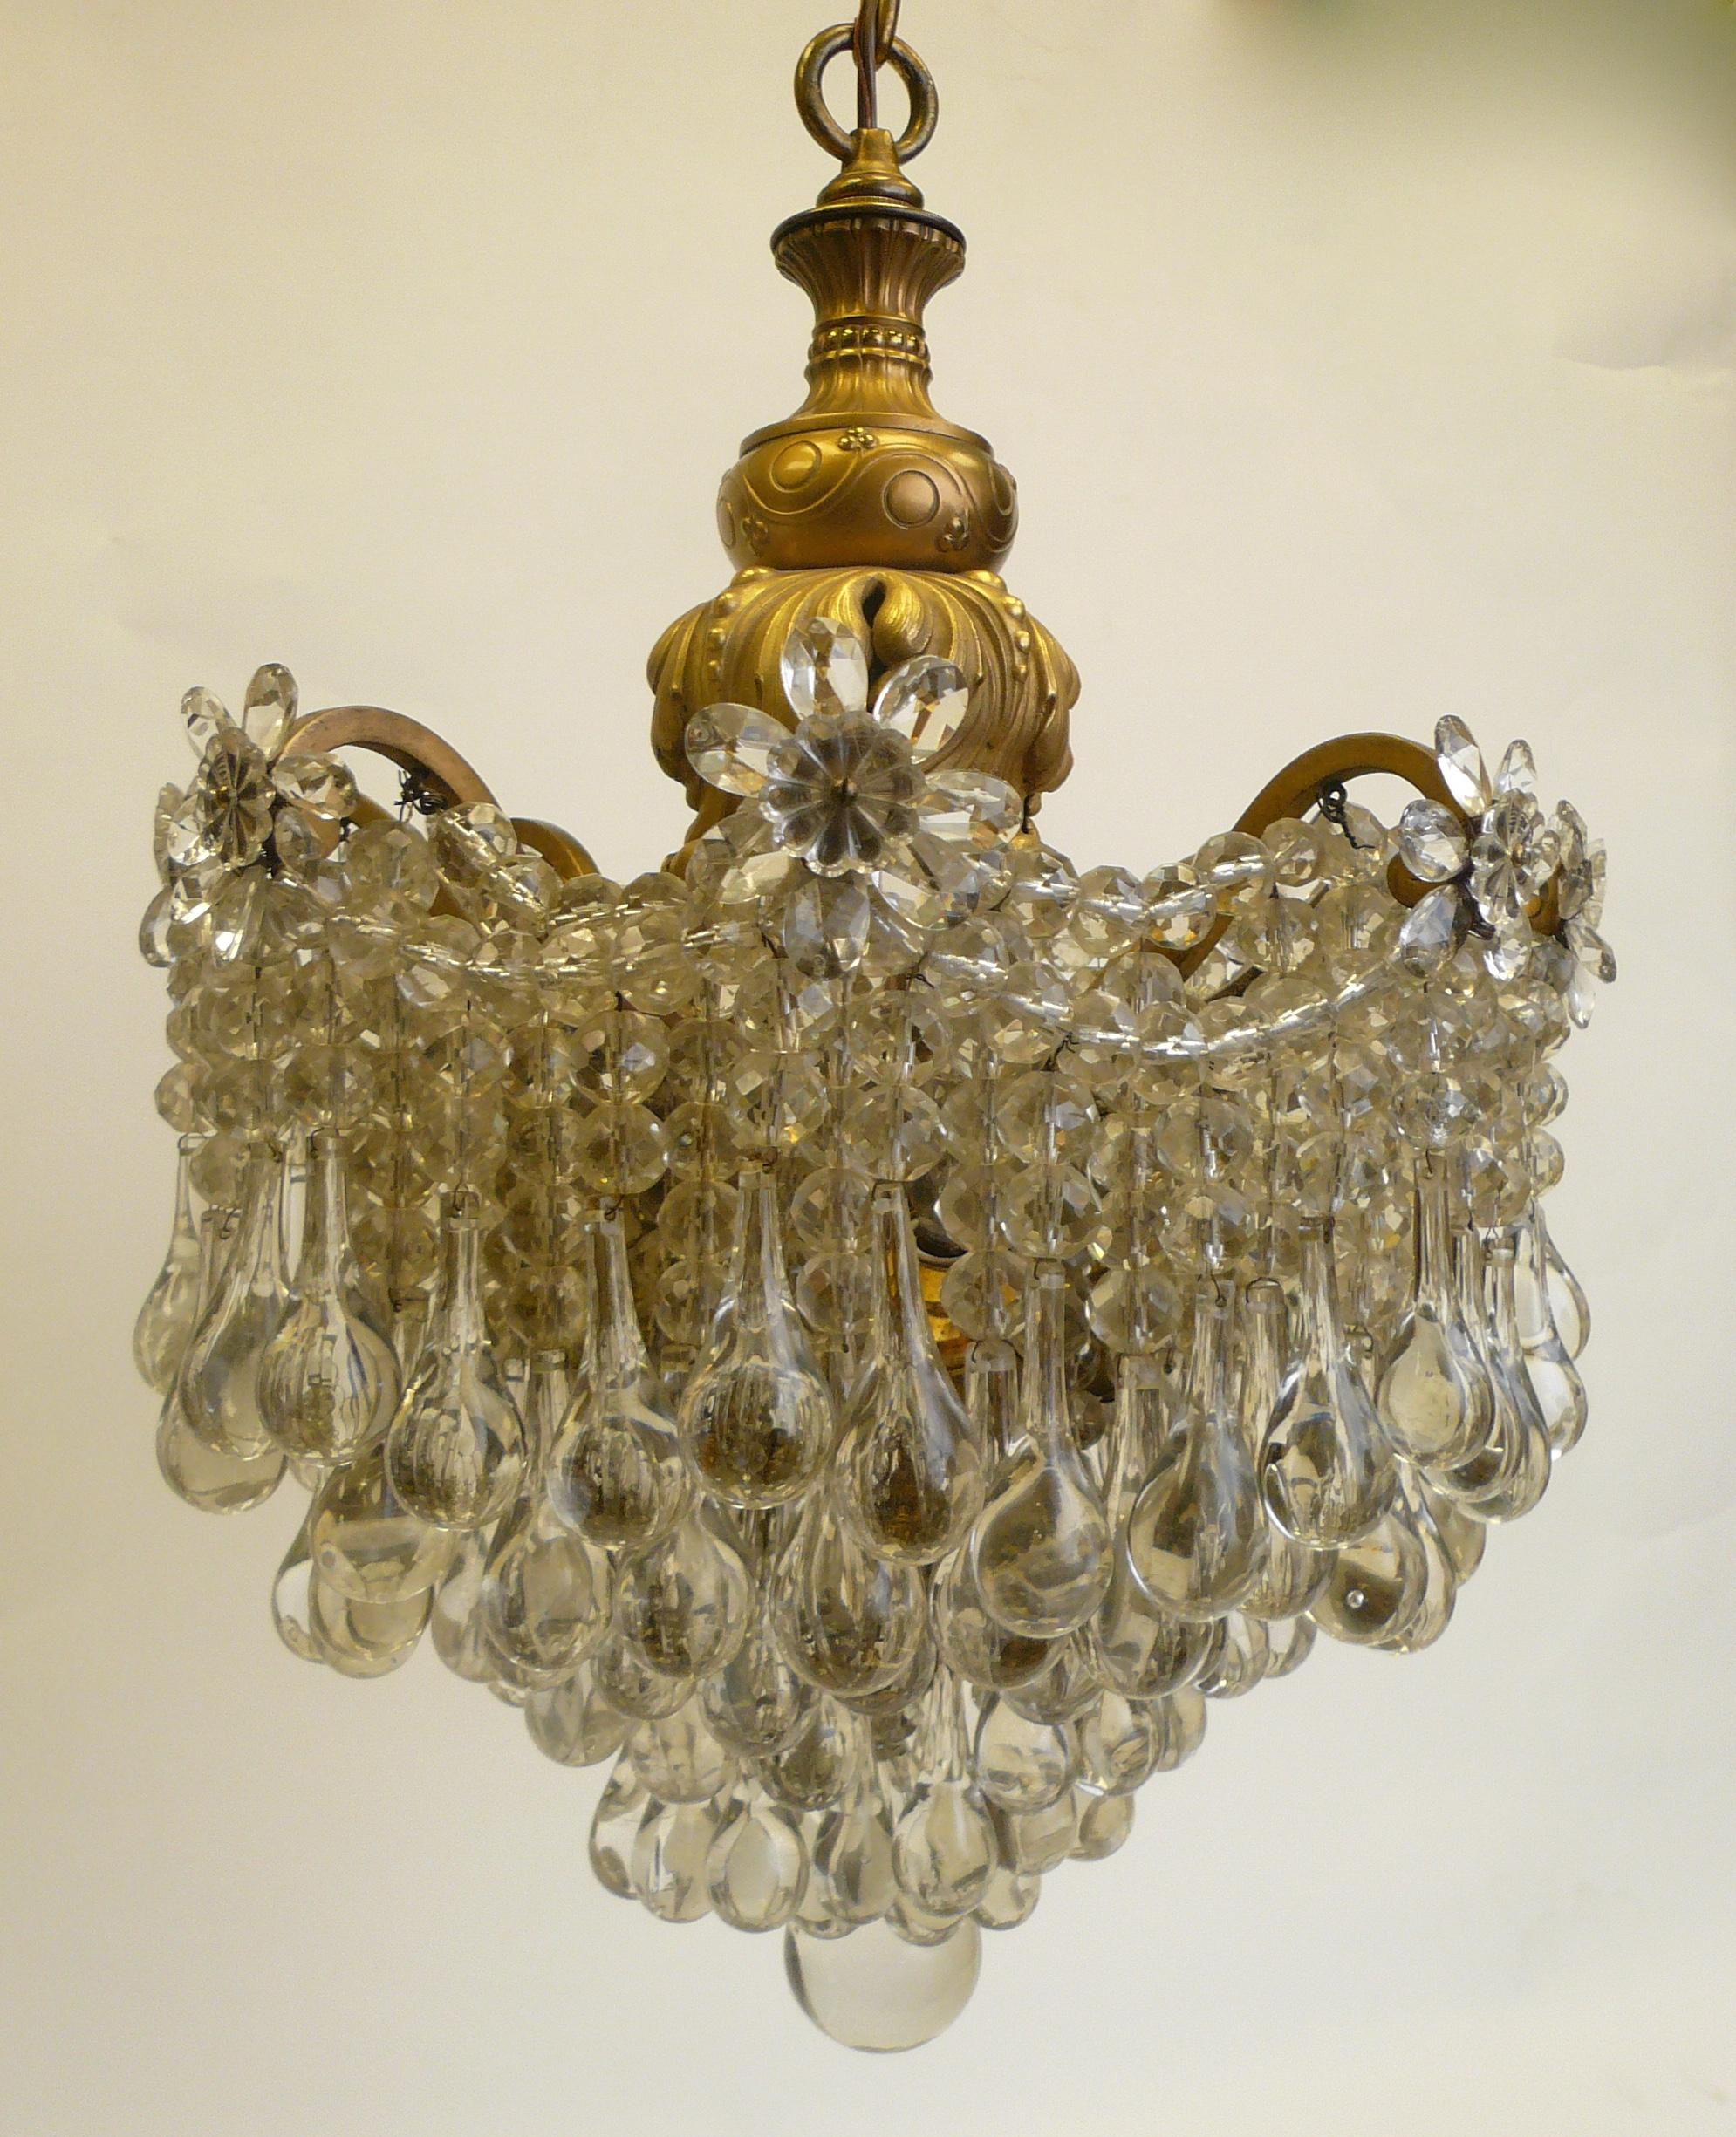 20th Century Gilt Bronze and Crystal Pendant Chandelier by E. F. Caldwell